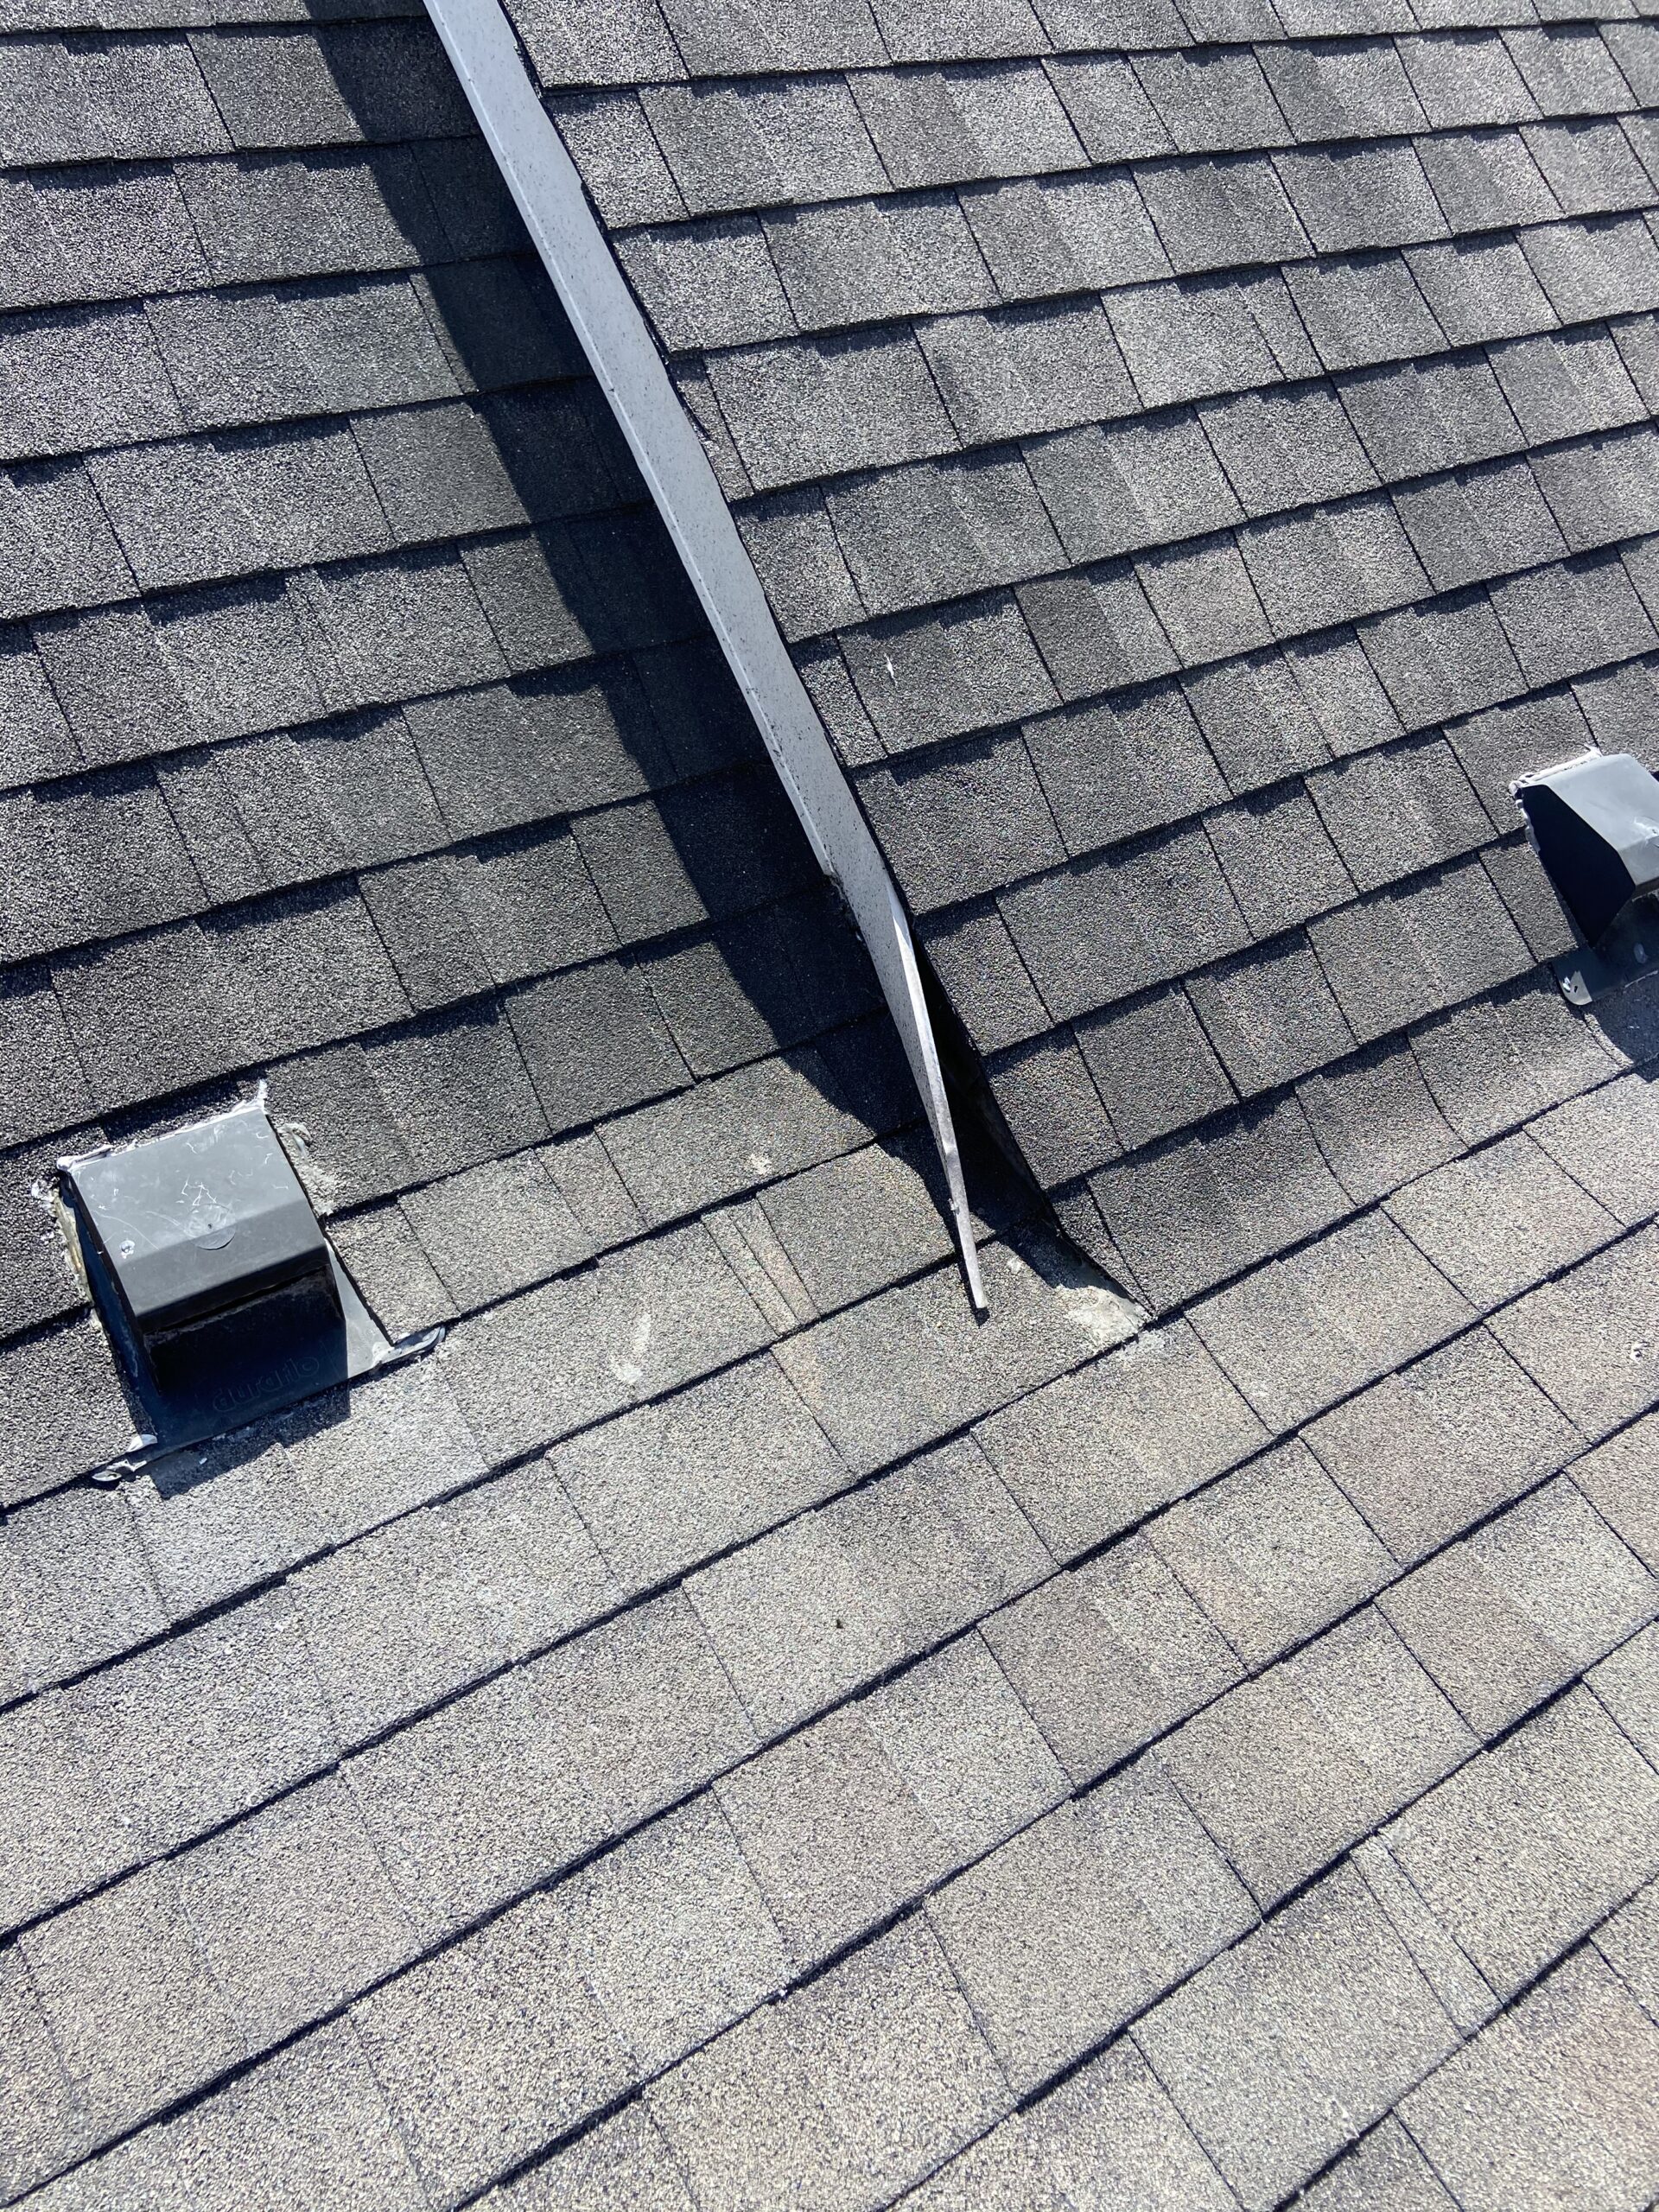 This is a picture of a brown shingle that has roof leaks